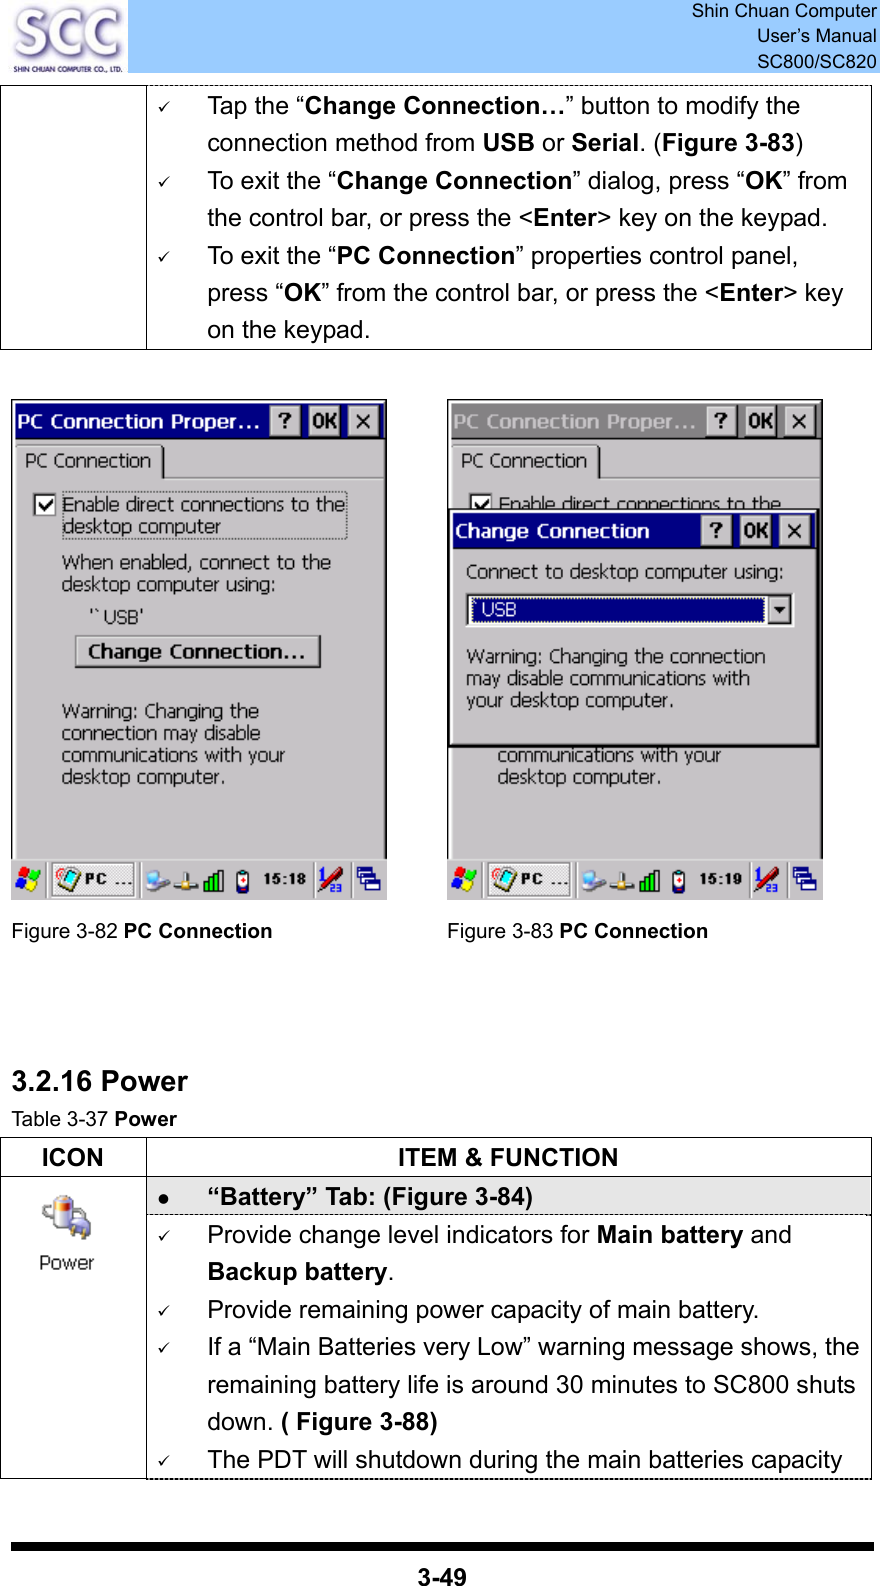  Shin Chuan Computer User’s Manual SC800/SC820  3-49 9 Tap the “Change Connection…” button to modify the connection method from USB or Serial. (Figure 3-83) 9 To exit the “Change Connection” dialog, press “OK” from the control bar, or press the &lt;Enter&gt; key on the keypad. 9 To exit the “PC Connection” properties control panel, press “OK” from the control bar, or press the &lt;Enter&gt; key on the keypad.     Figure 3-82 PC Connection Figure 3-83 PC Connection    3.2.16 Power Table 3-37 Power ICON  ITEM &amp; FUNCTION z “Battery” Tab: (Figure 3-84)       9 Provide change level indicators for Main battery and Backup battery. 9 Provide remaining power capacity of main battery. 9 If a “Main Batteries very Low” warning message shows, the remaining battery life is around 30 minutes to SC800 shuts down. ( Figure 3-88) 9 The PDT will shutdown during the main batteries capacity 